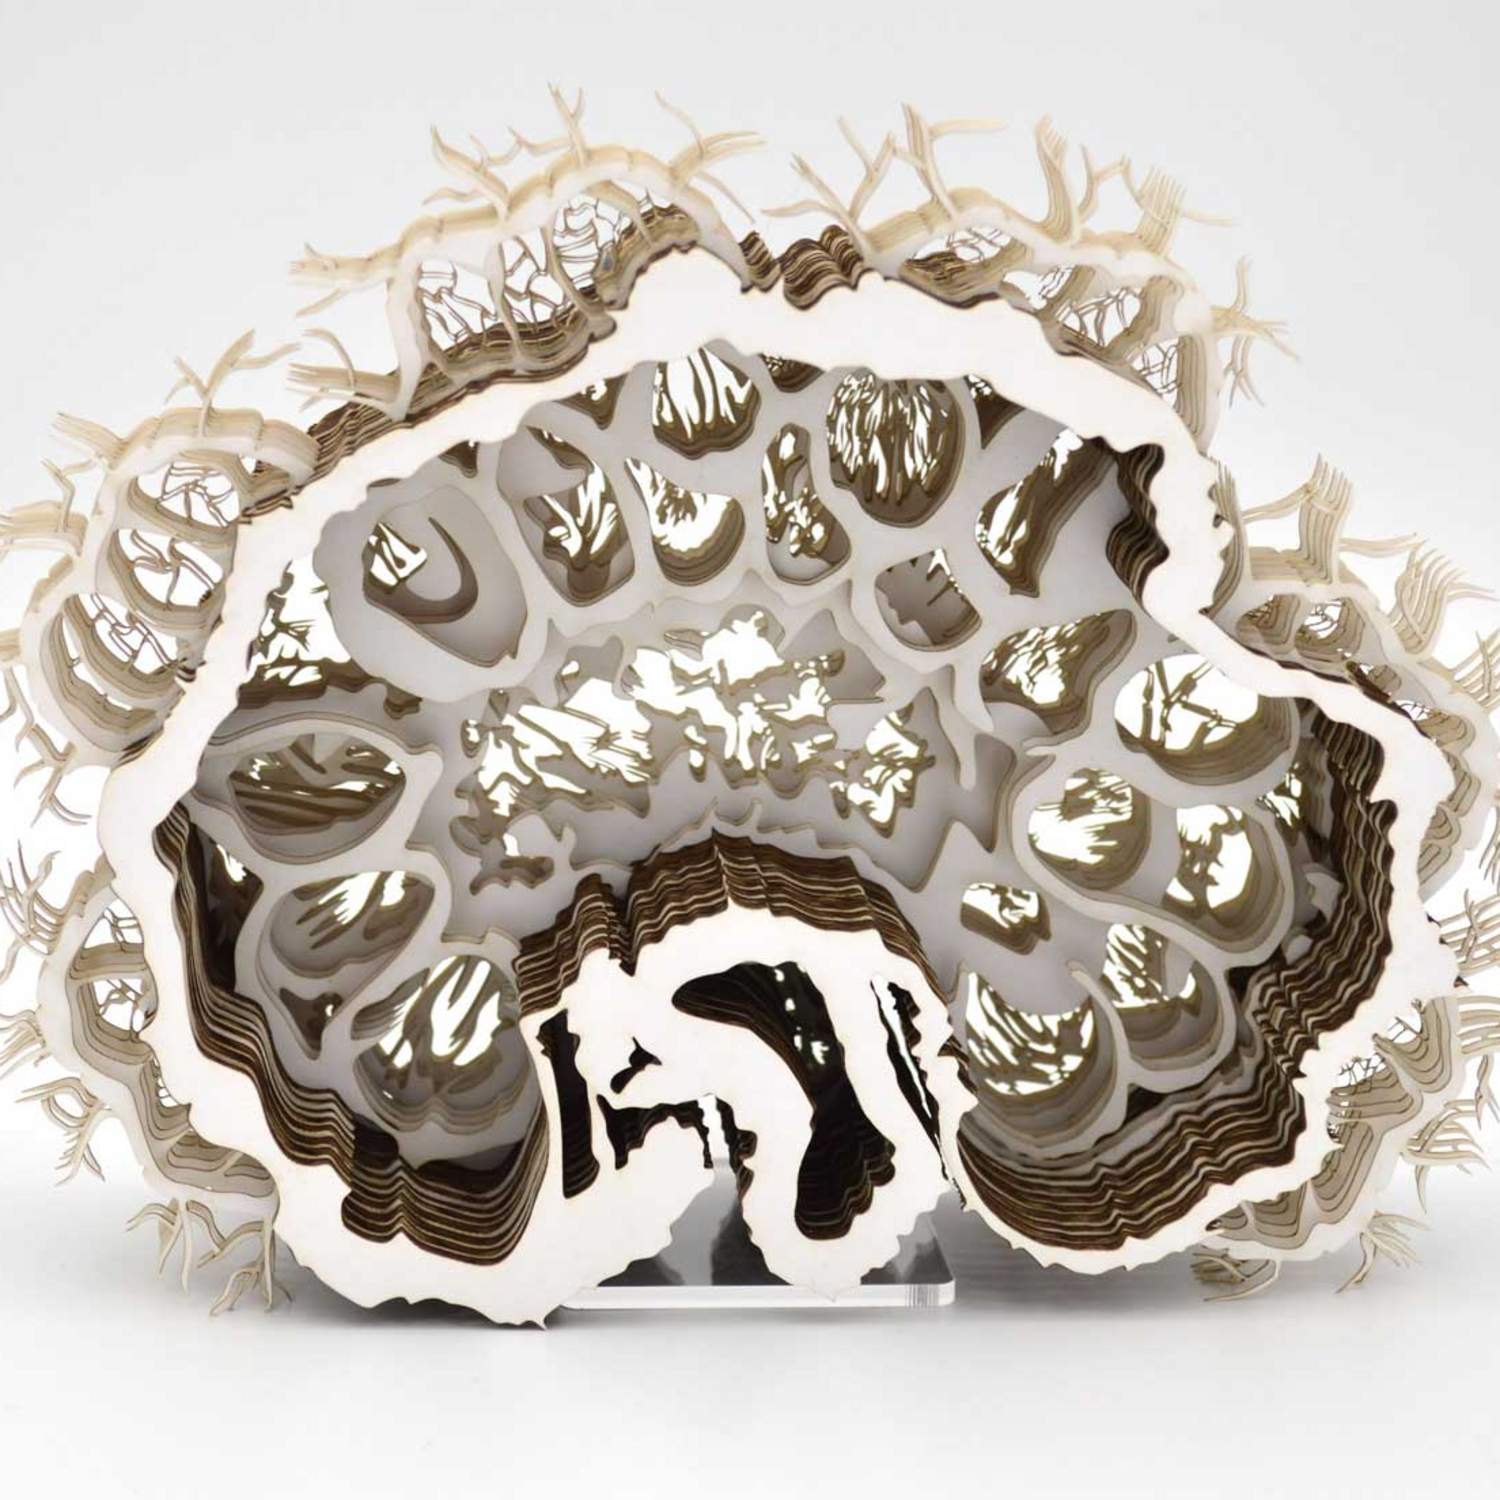 A human brain made out of paper